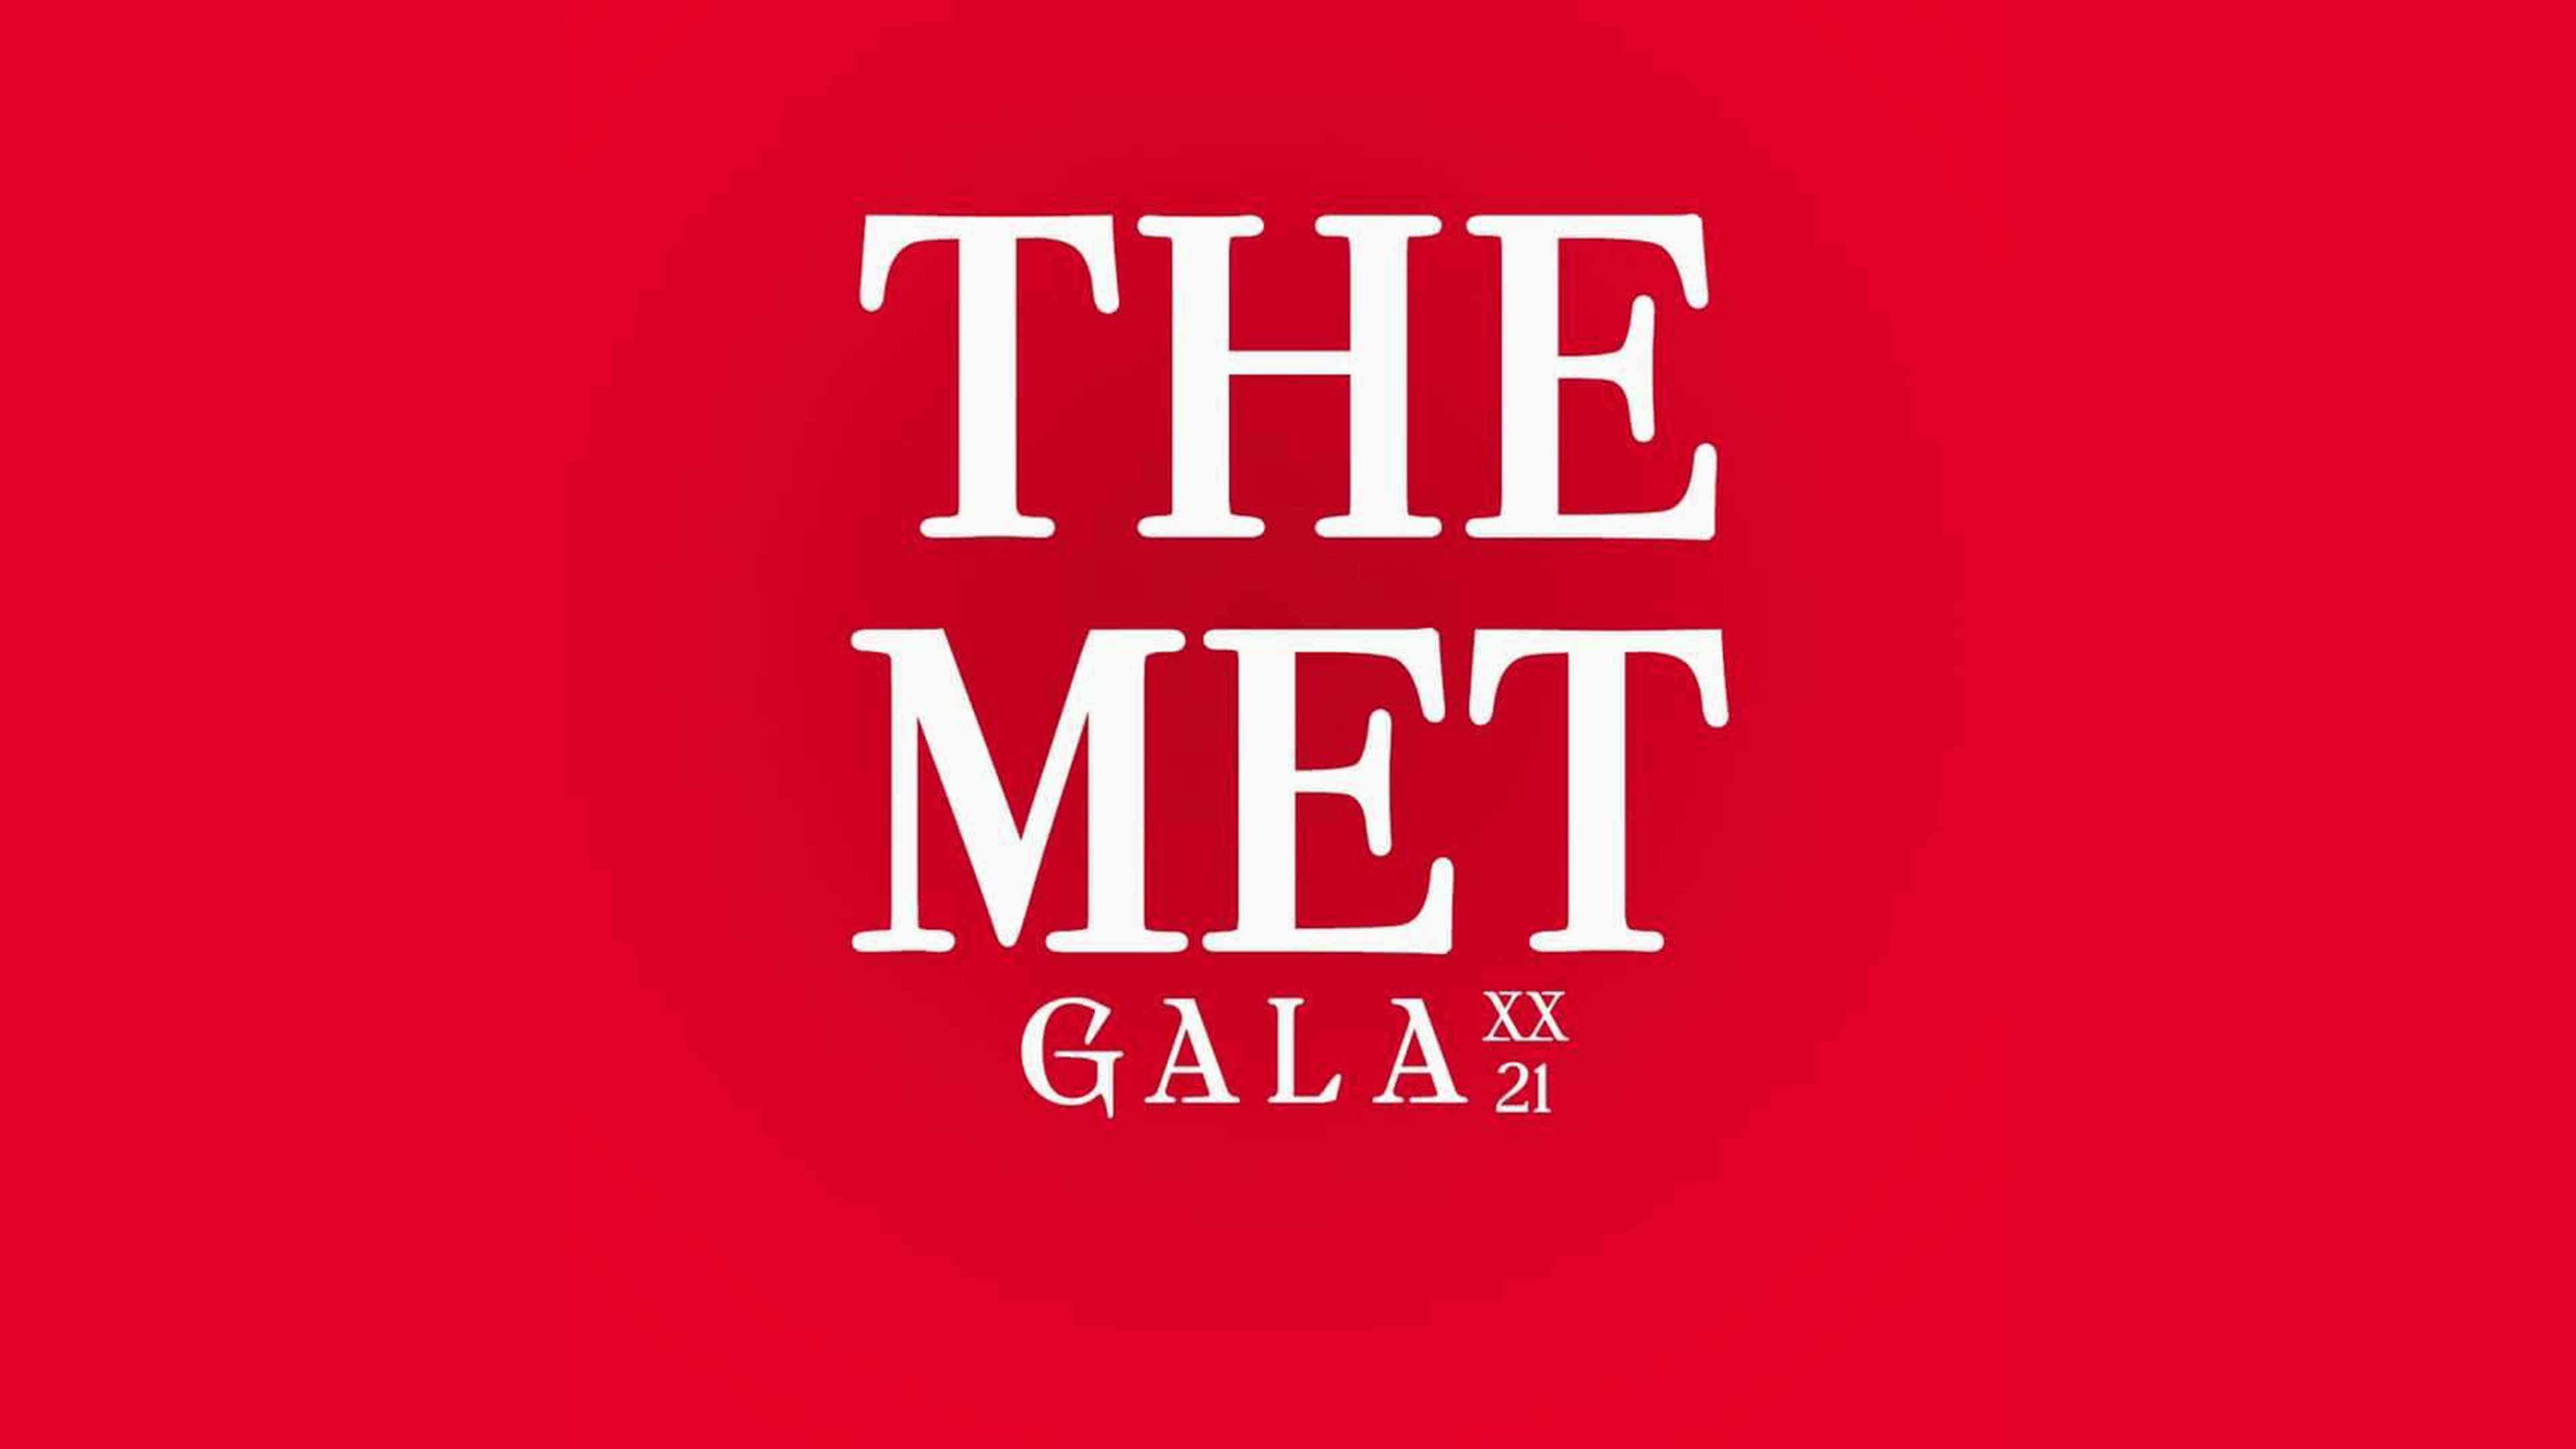 What exactly is Met Gala for photo from The Met Gala 2021